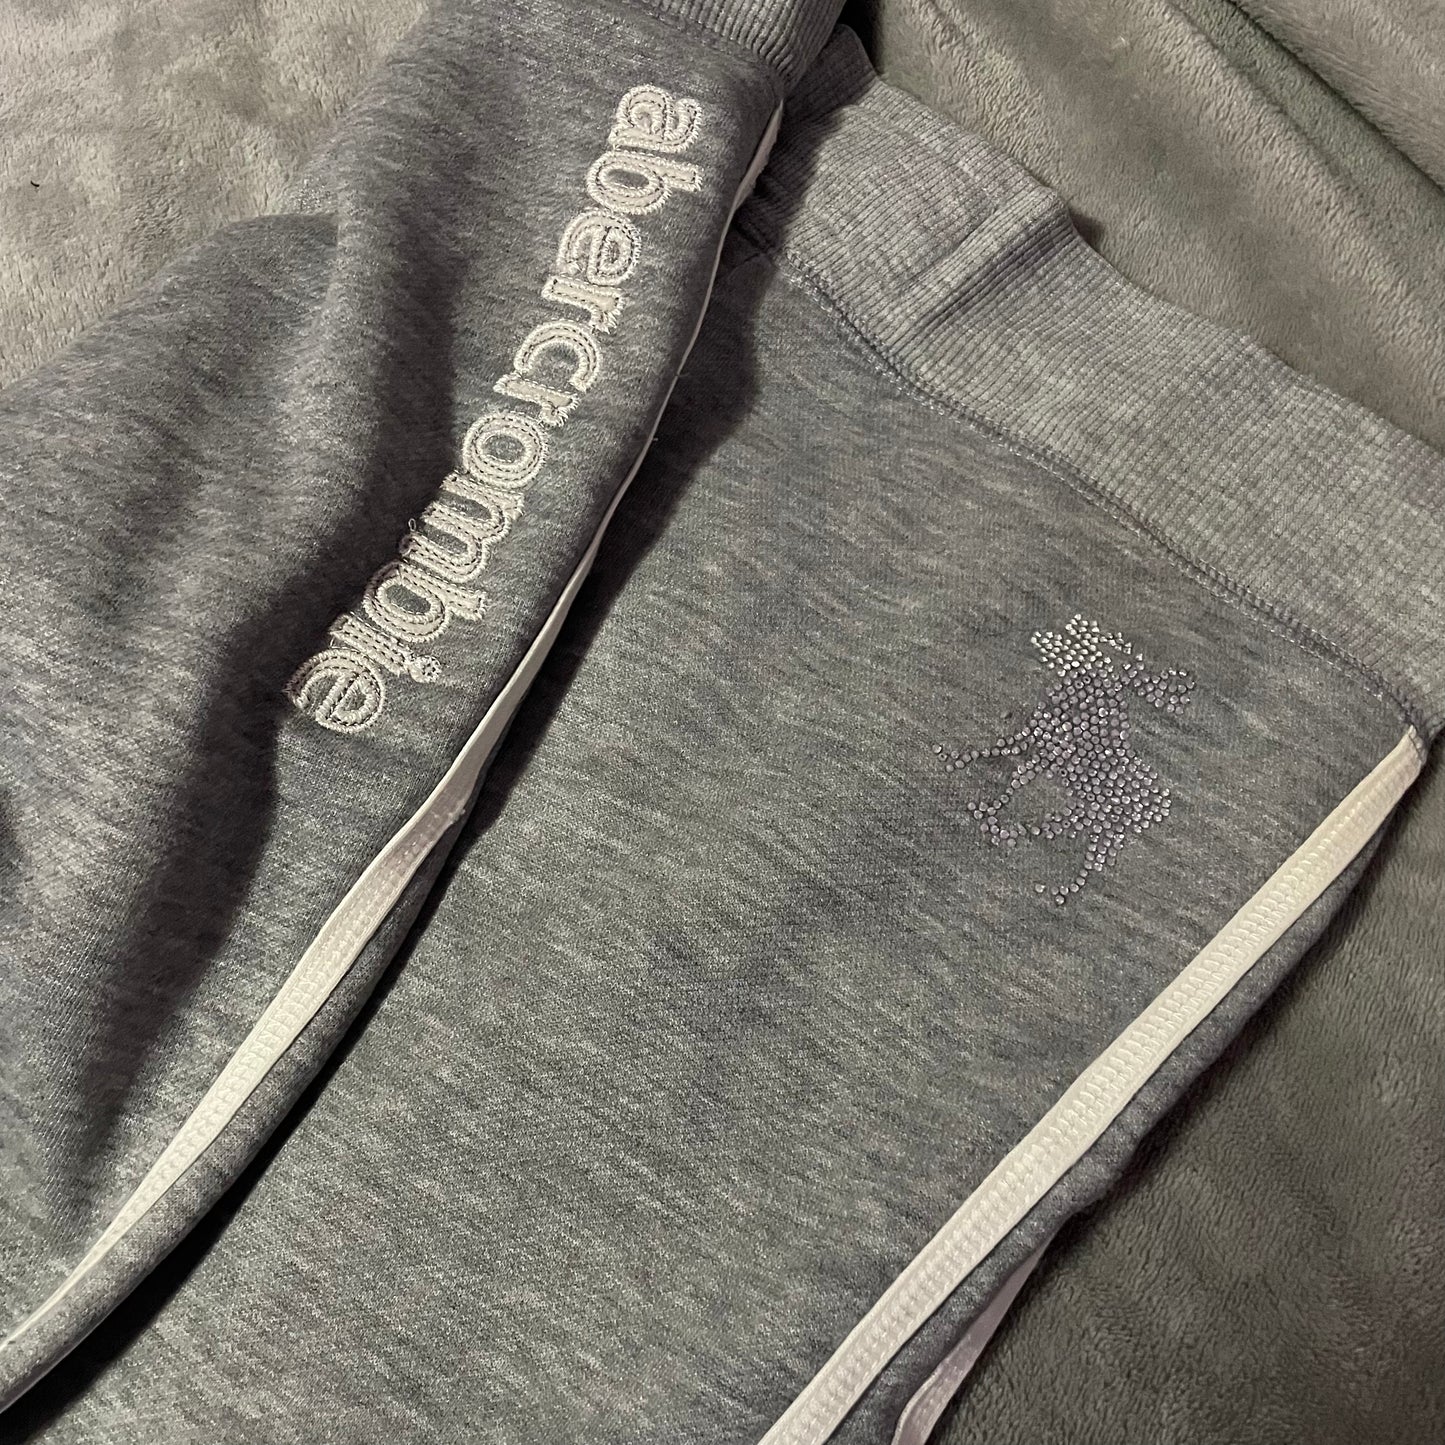 Abercrombie and Fitch track pants -